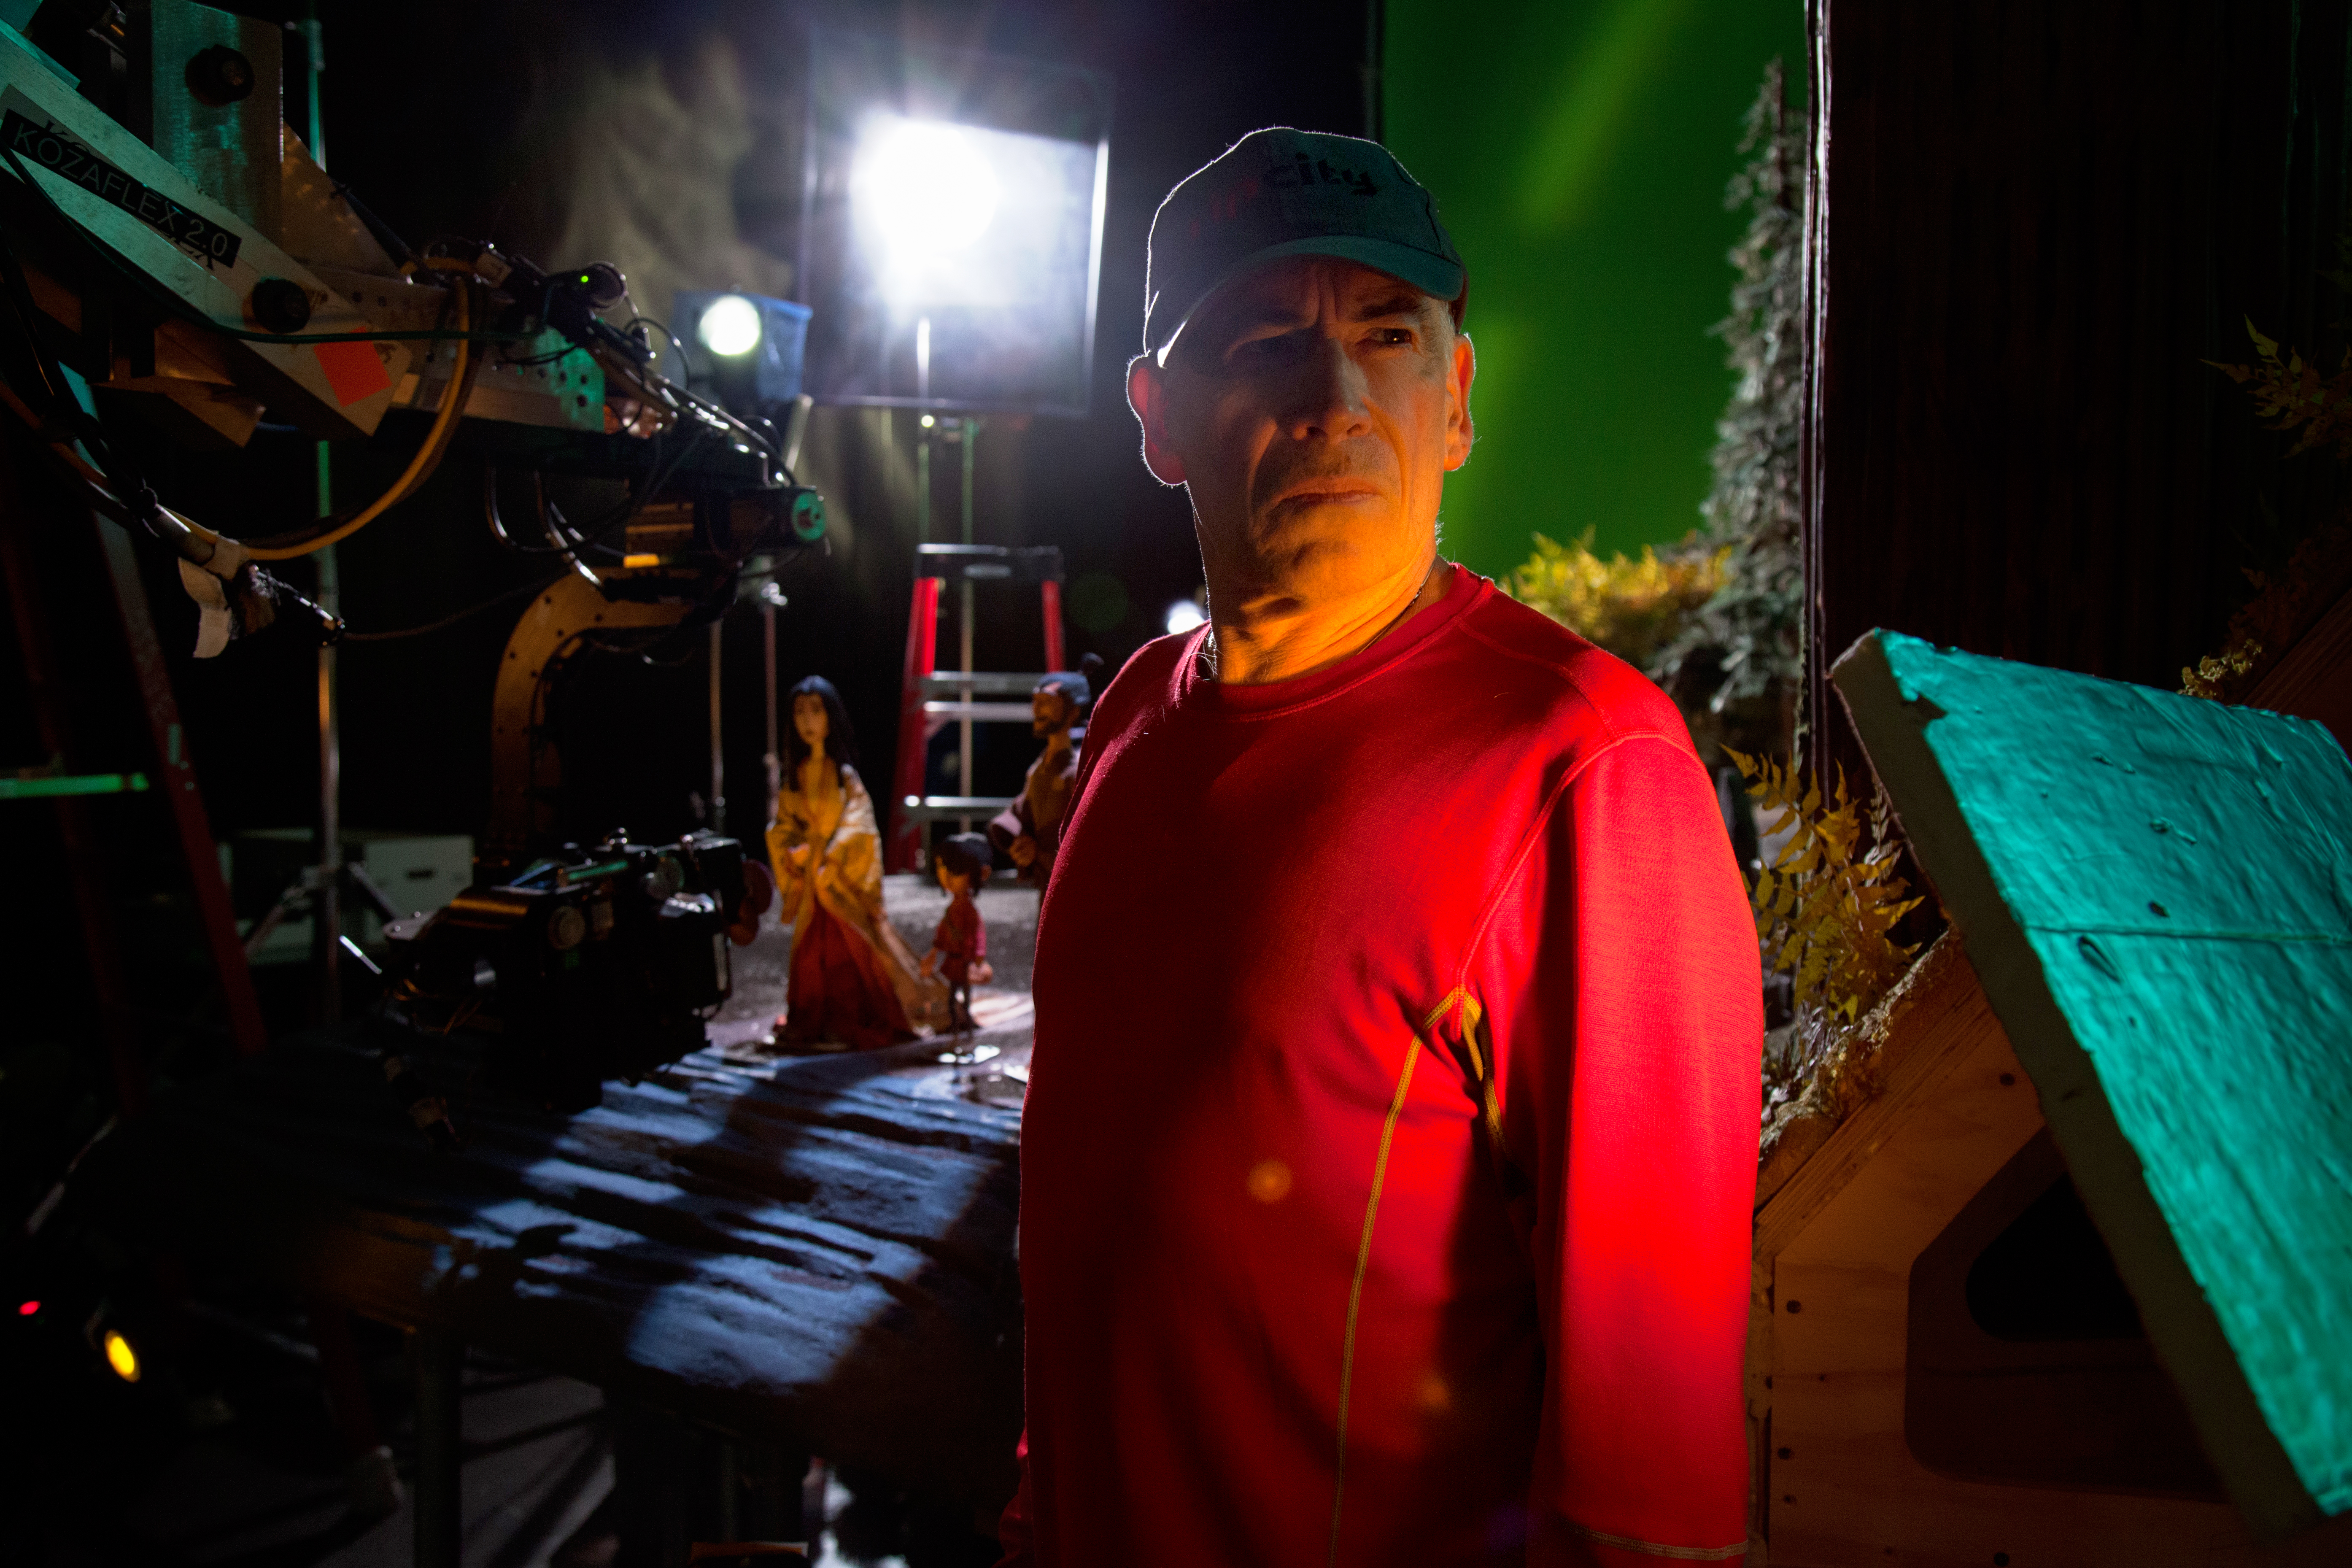 Director of photography Frank Passingham working on the set of animation studio LAIKA’s Kubo and the Two Strings. Photo: Steven Wong Jr | Laika Studios / Focus Features